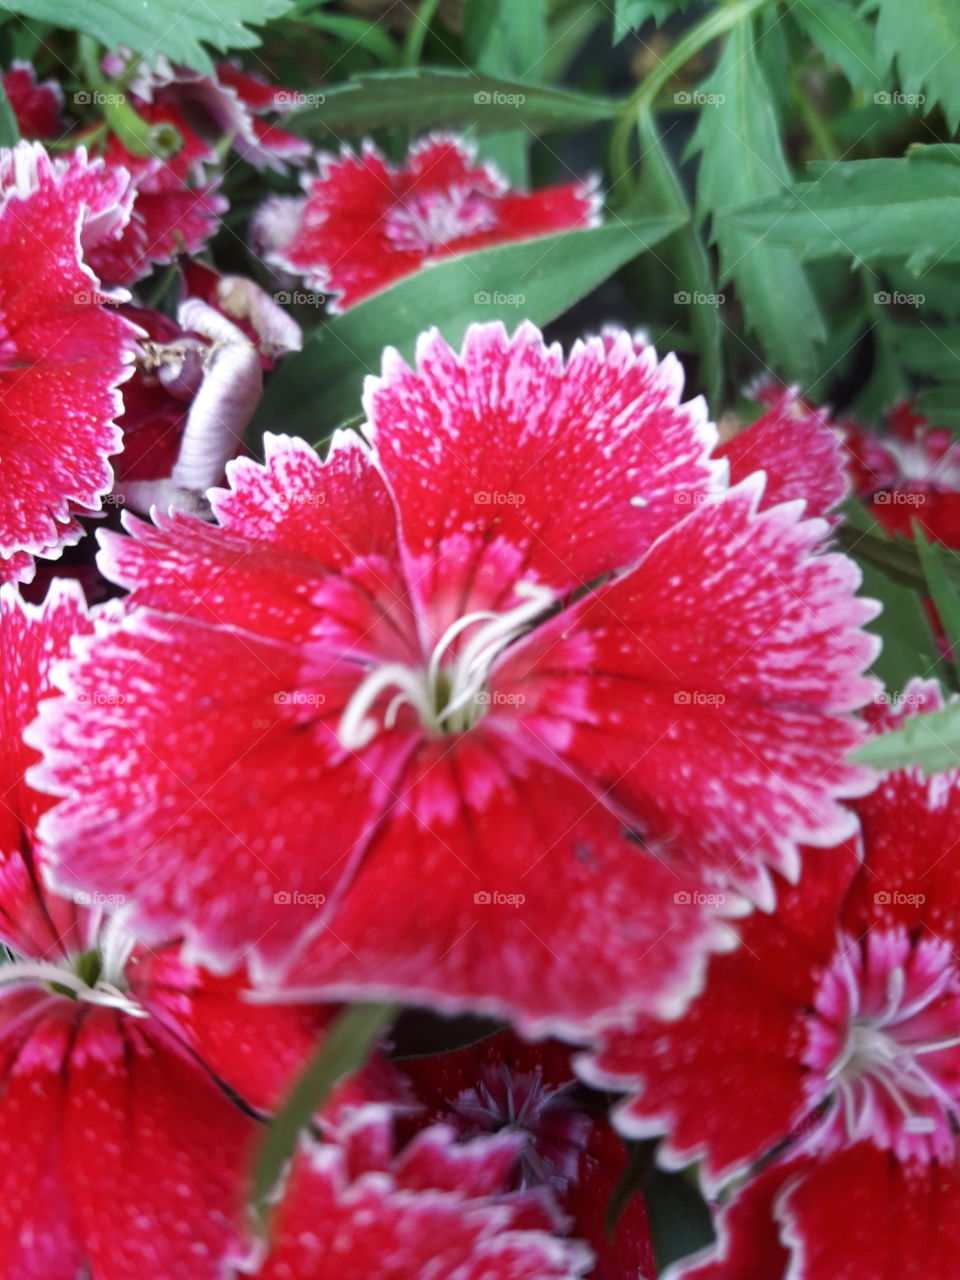 two tone red flower has white line pollen on the middle.